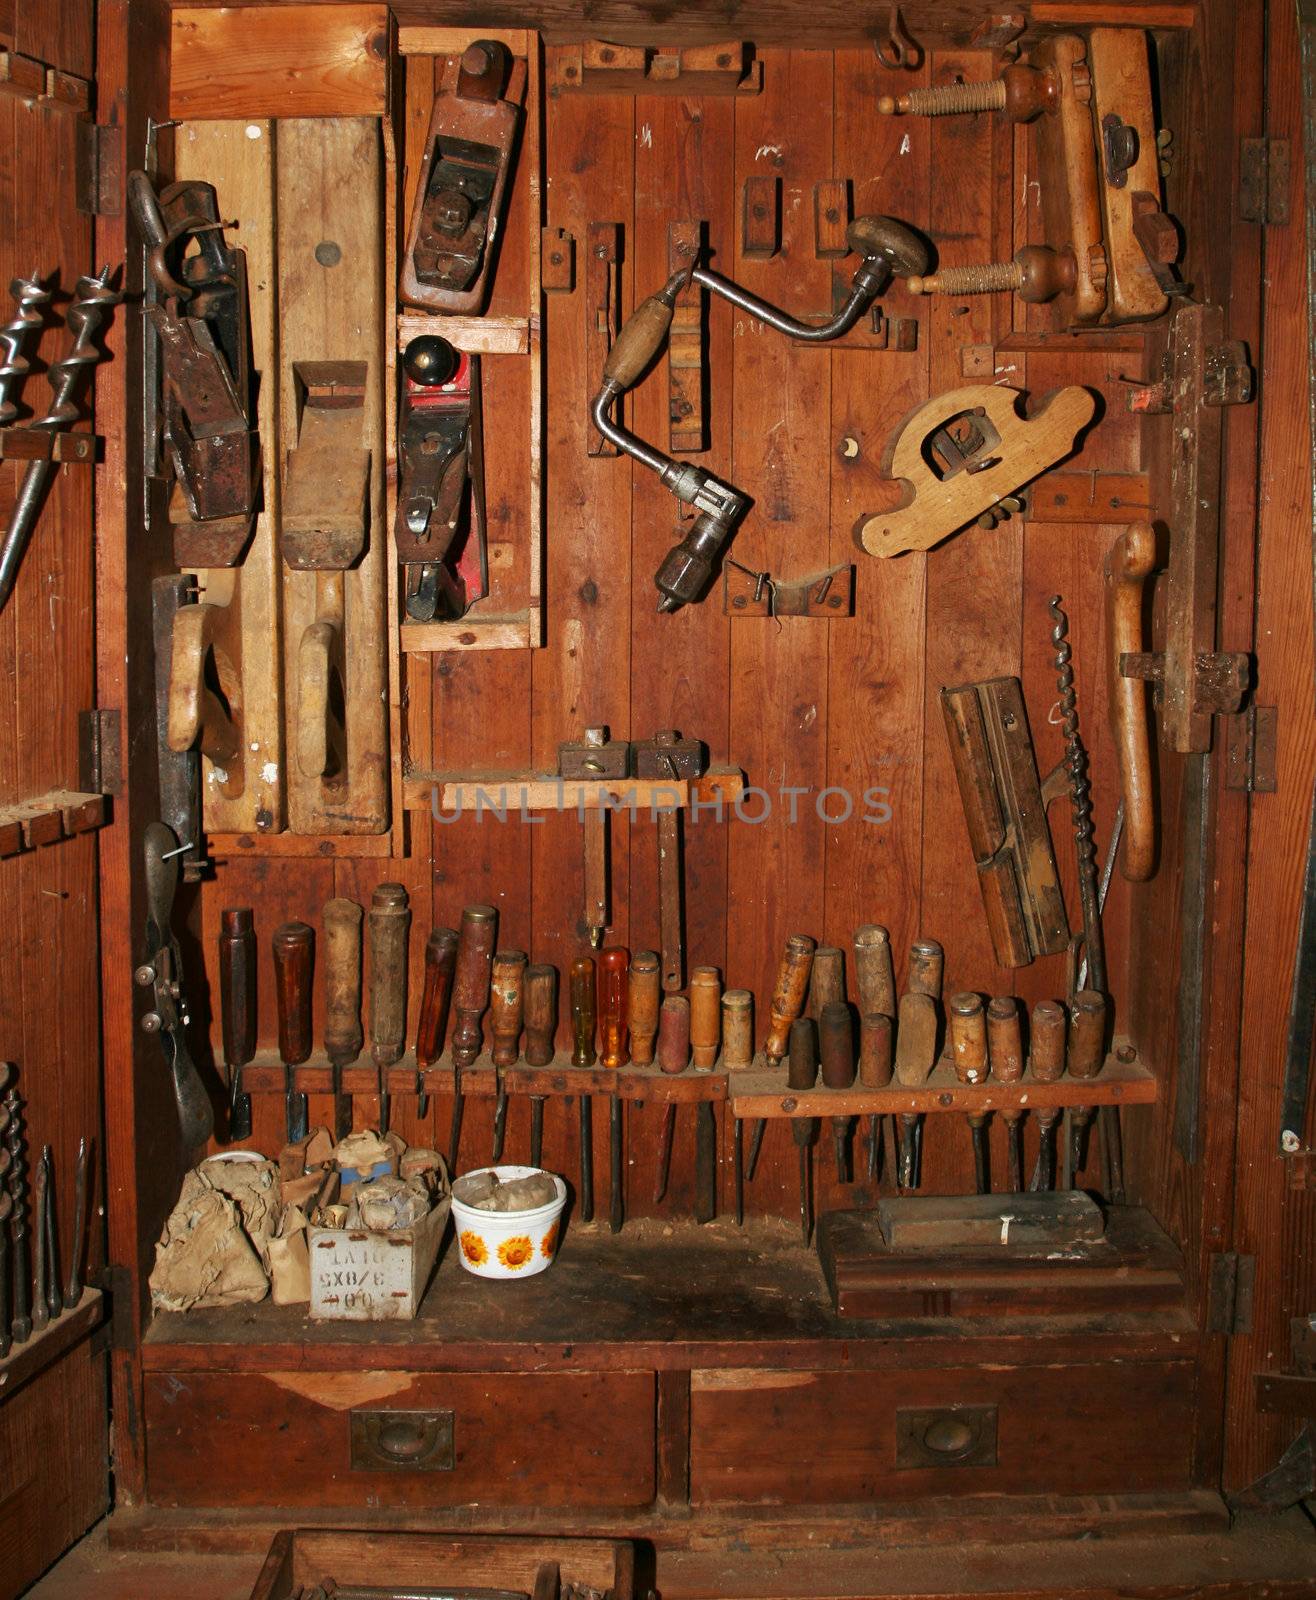 Very old and worn woodworking tools in worn down cabinet